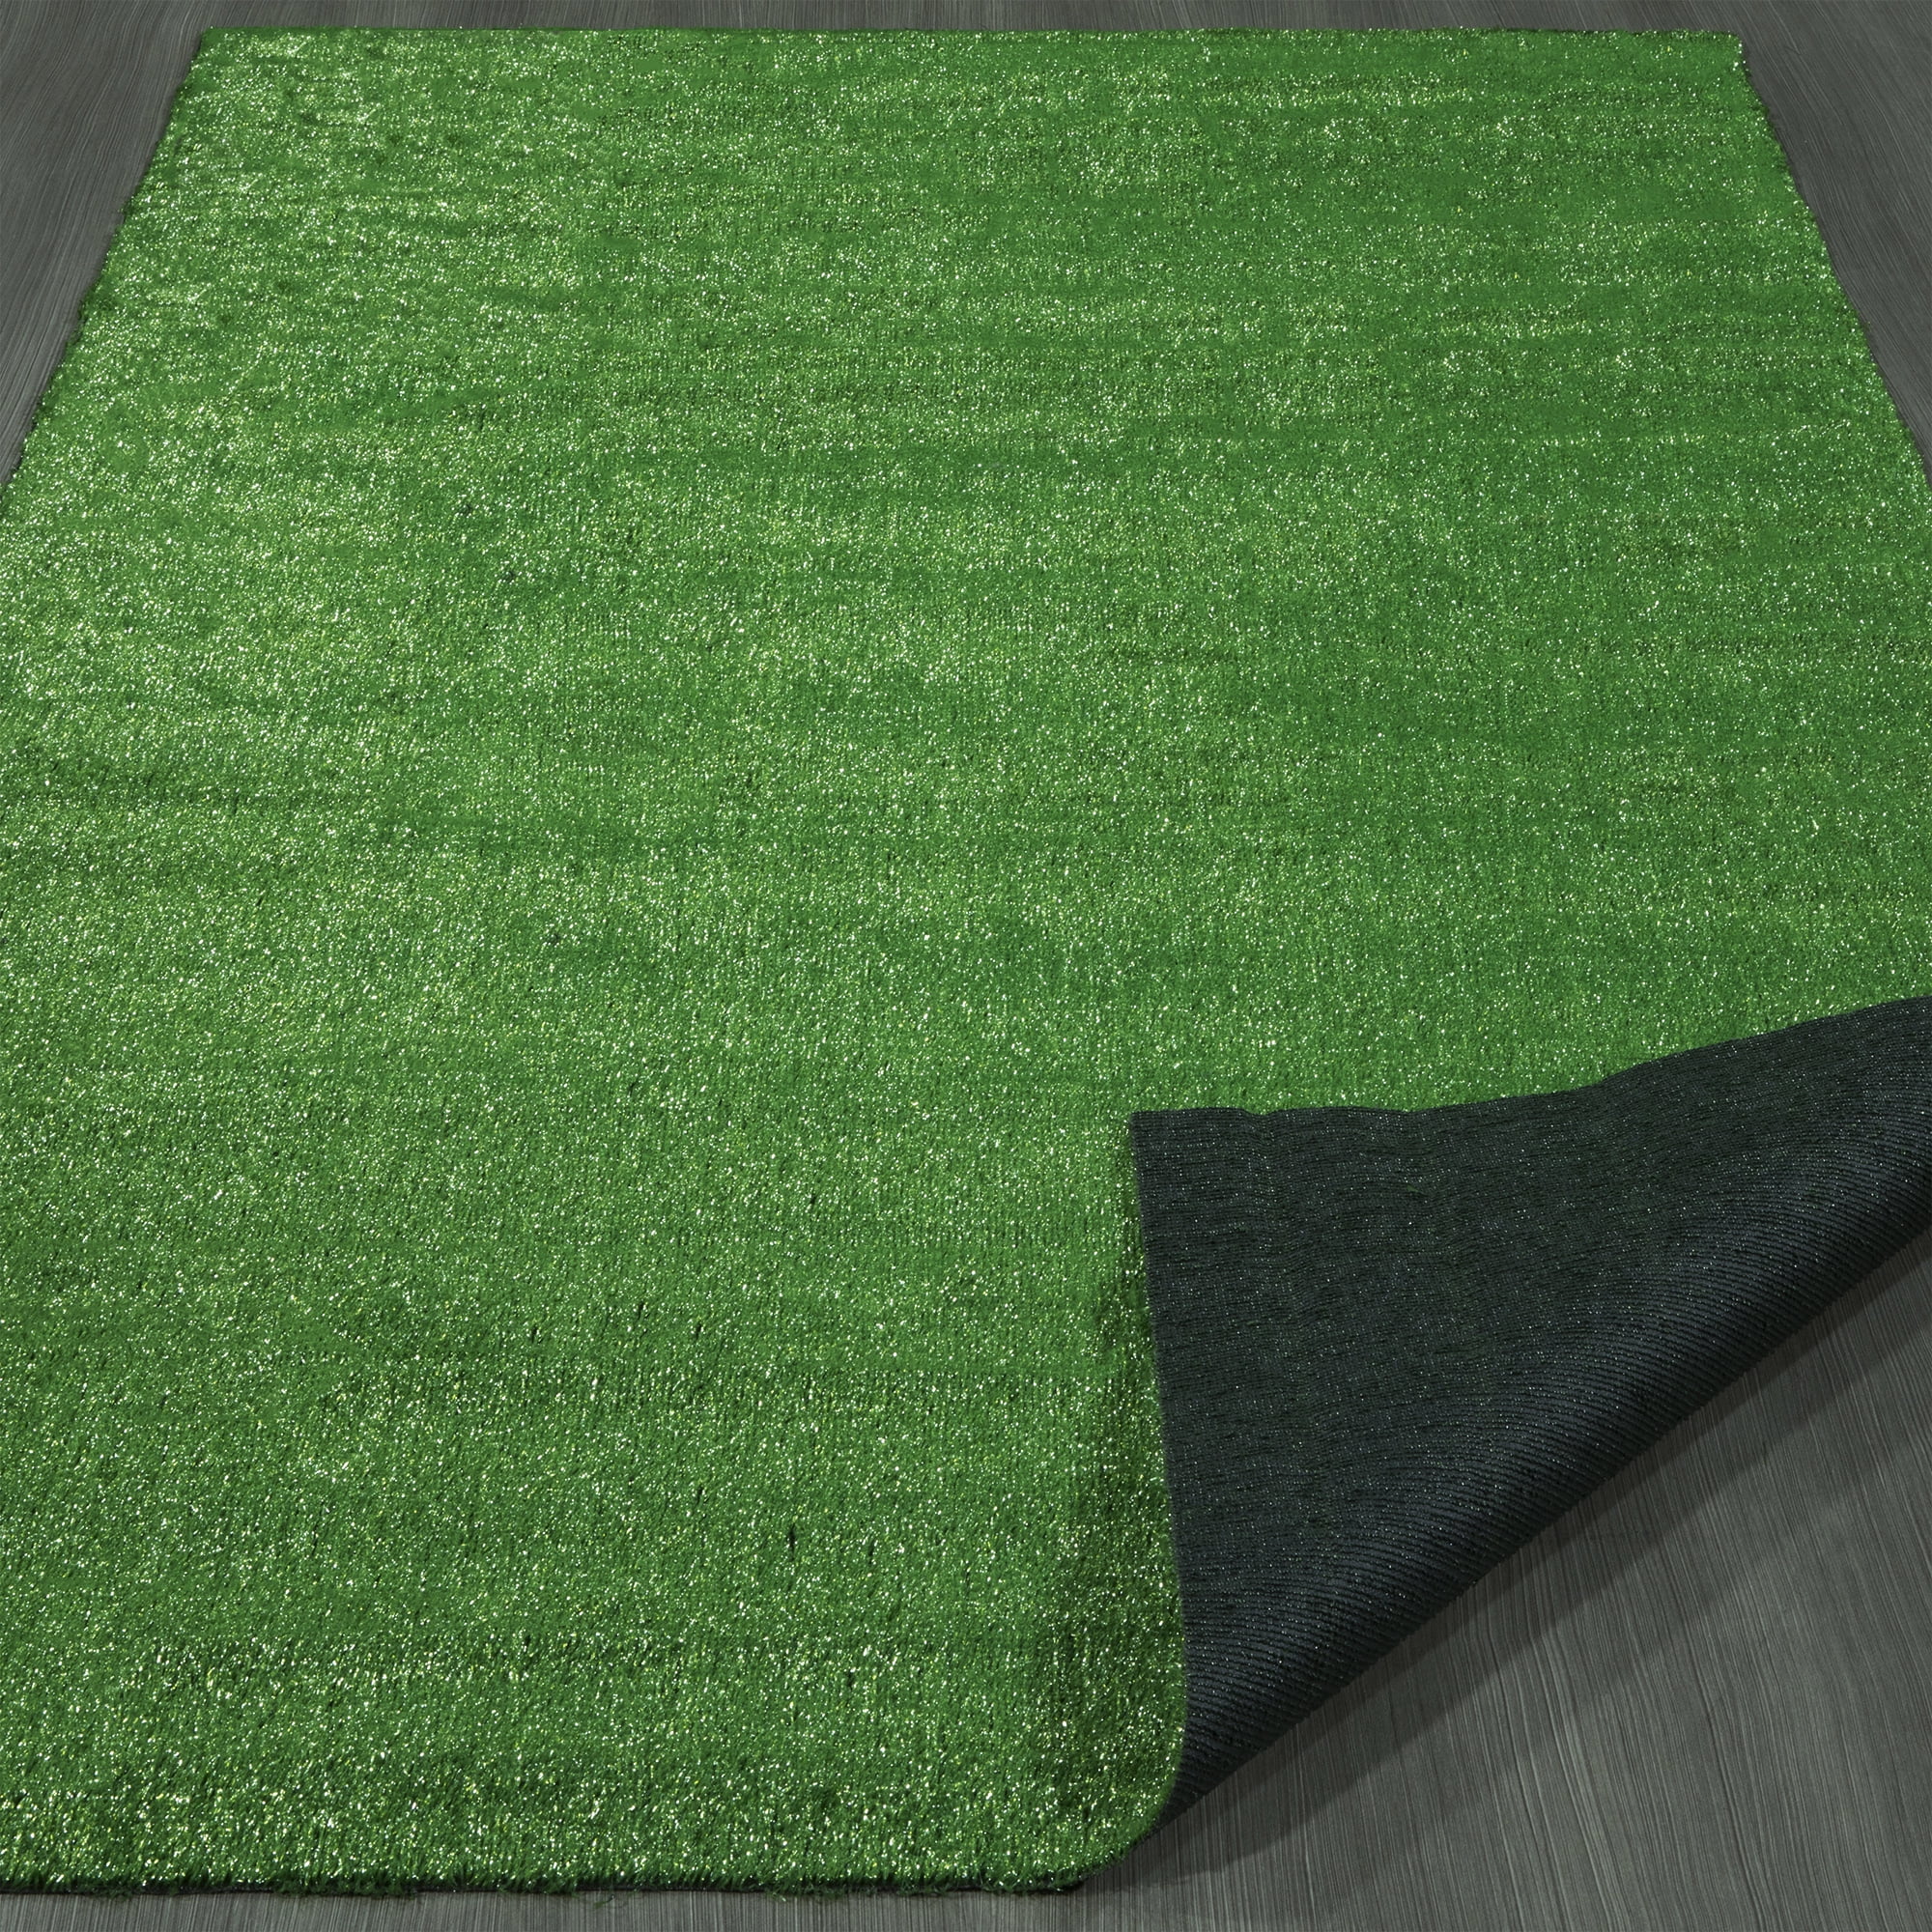 Sweet Home Meadowland Artificial Grass, Outdoor Rug That Looks Like Grass